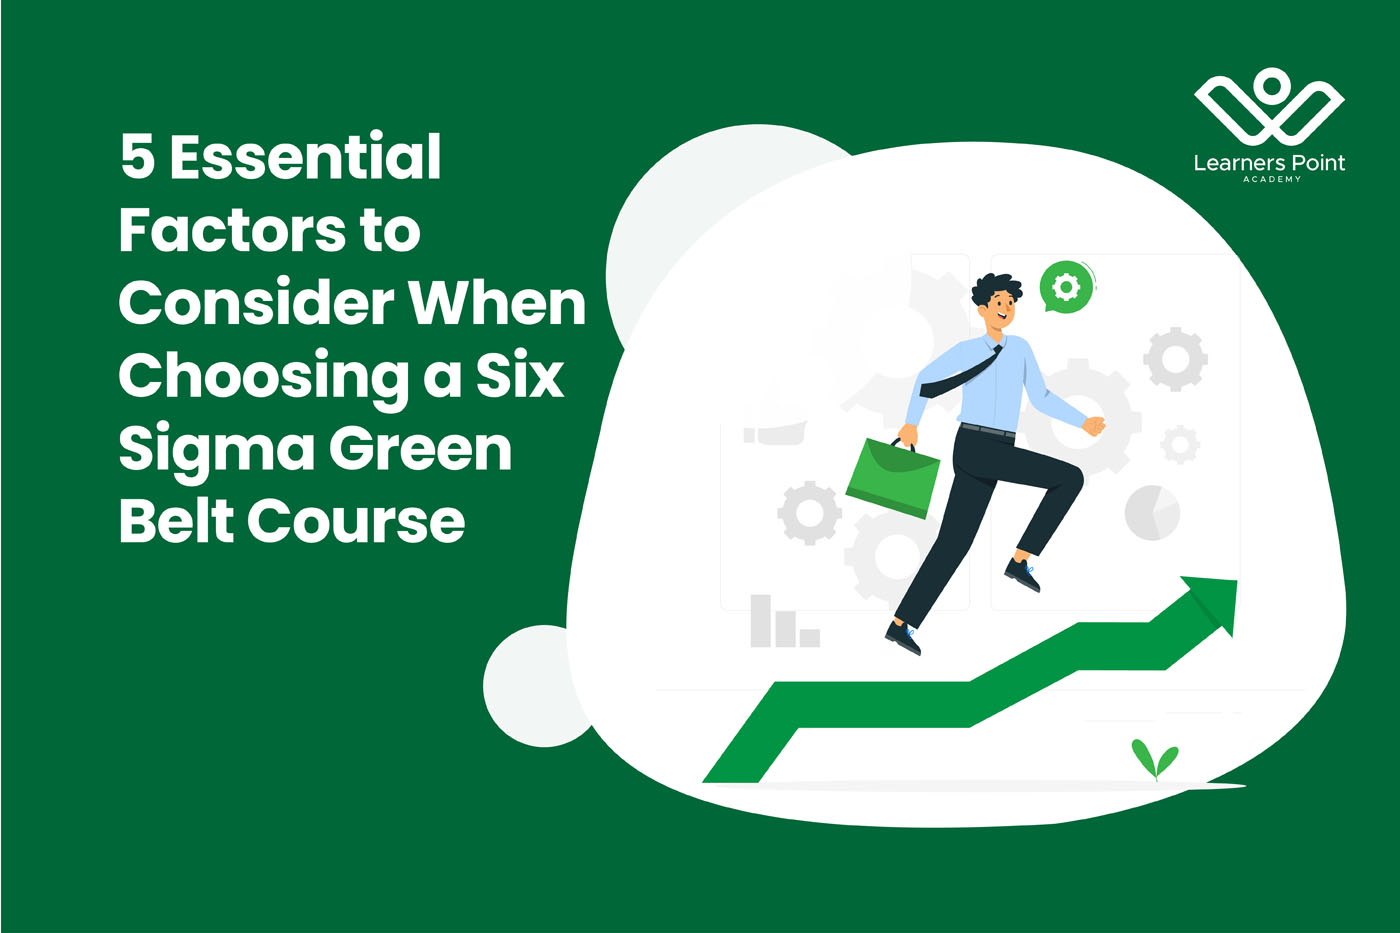 5 Essential Factors to Consider When Choosing a Six Sigma Green Belt Course